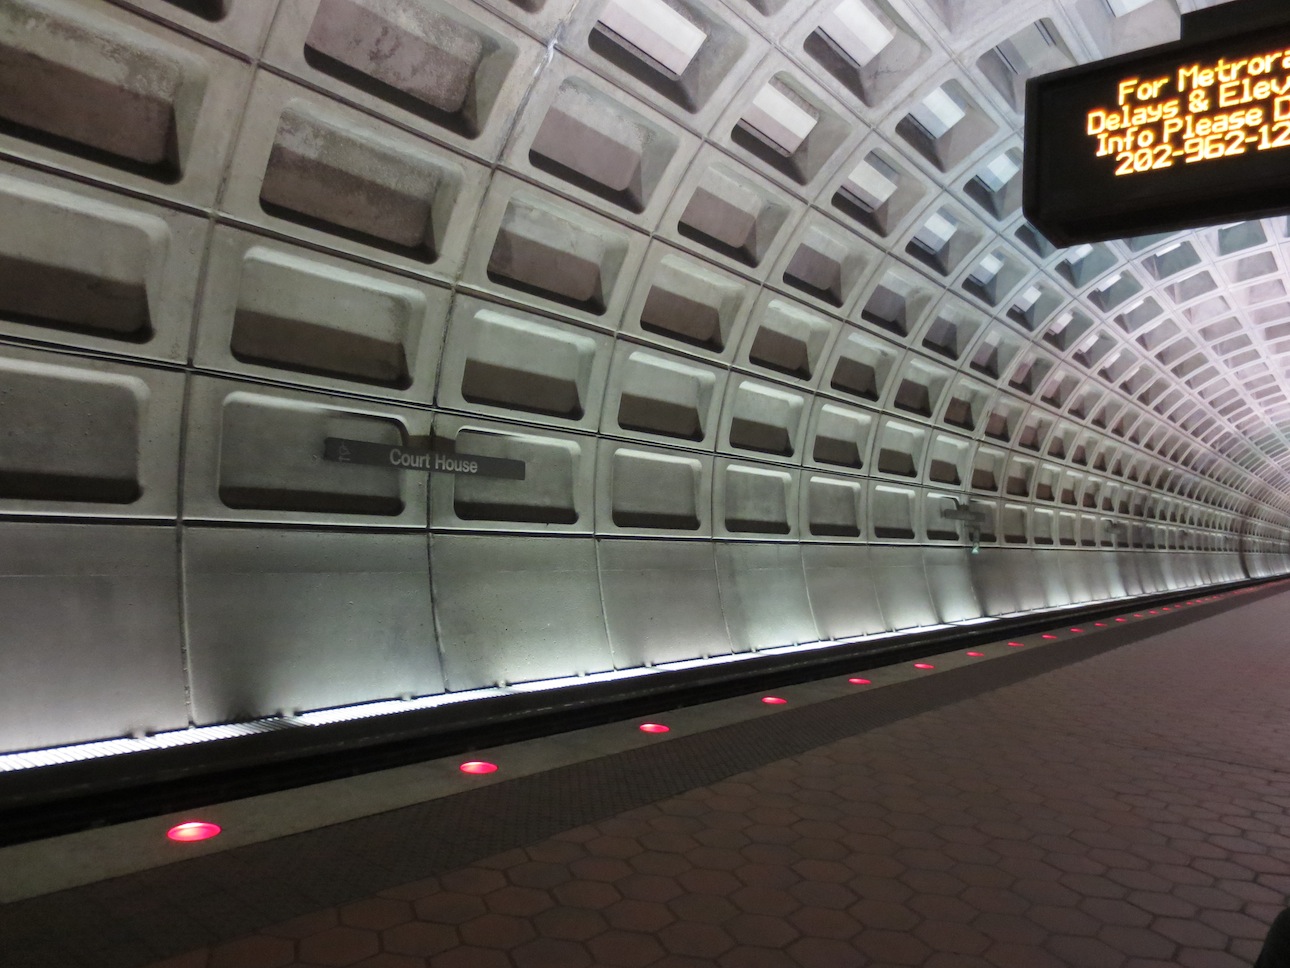 A view inside the Courthouse Metro station.